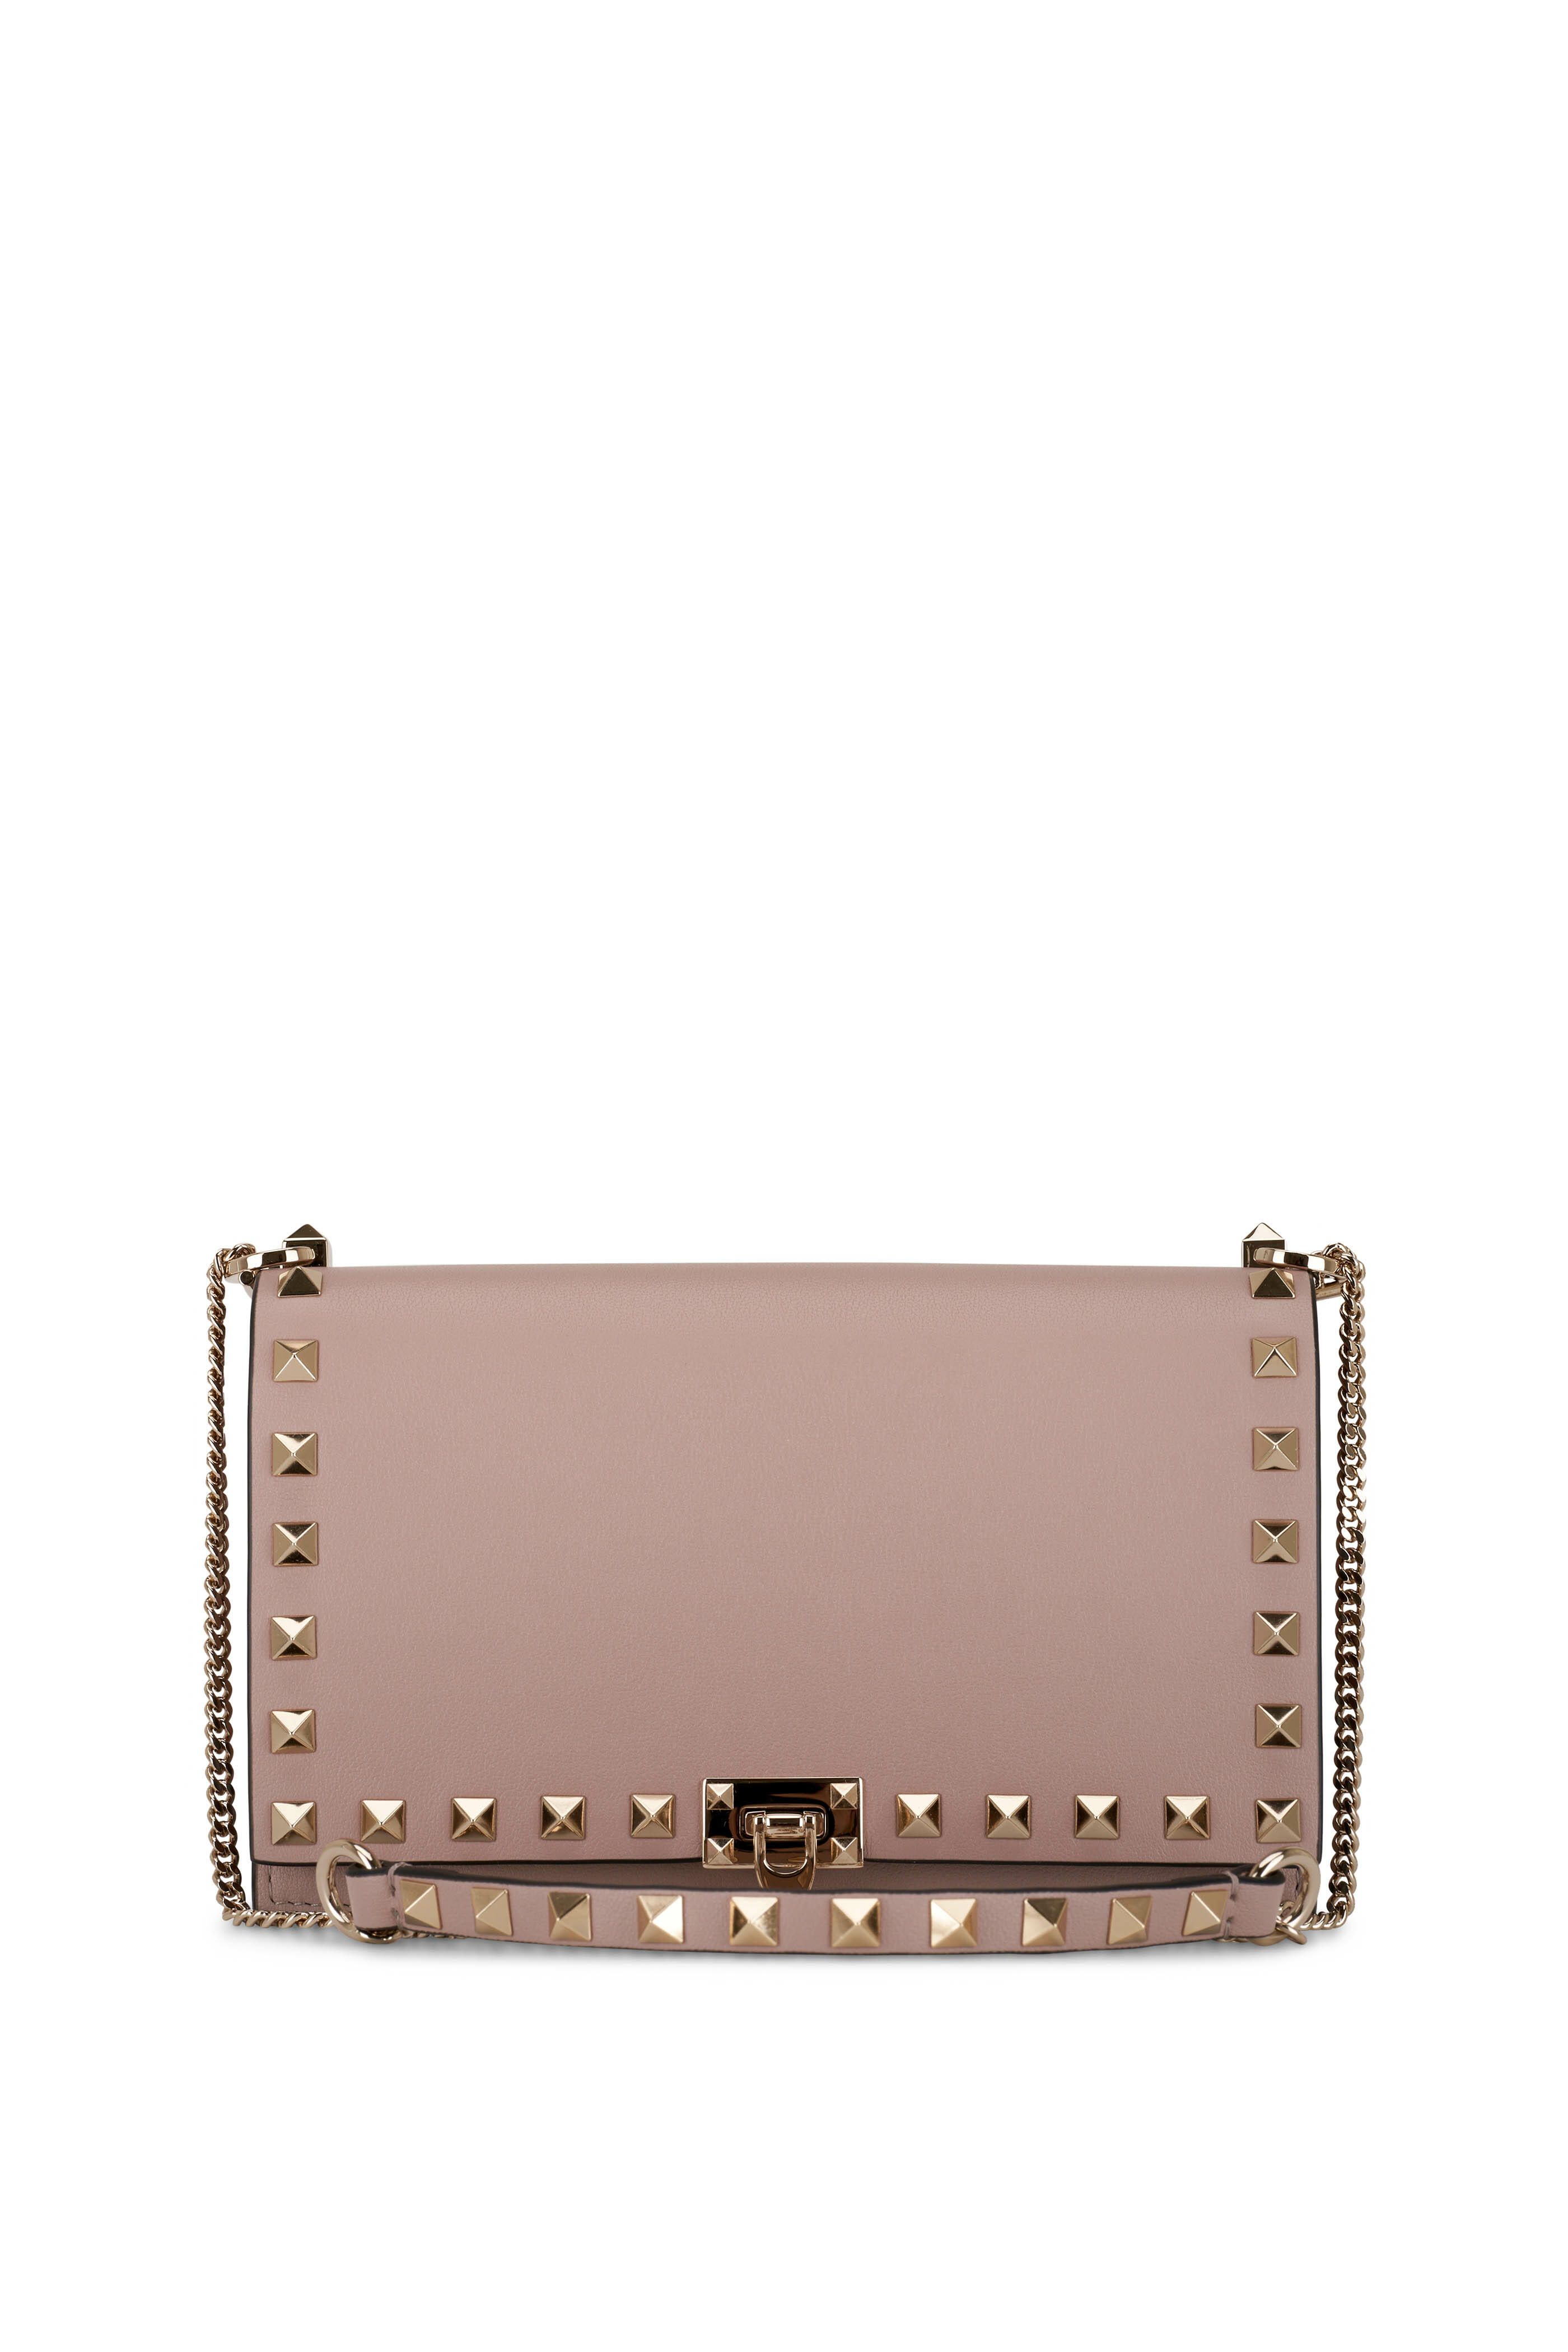 Valentino Rockstud Leather Clutch Pouch